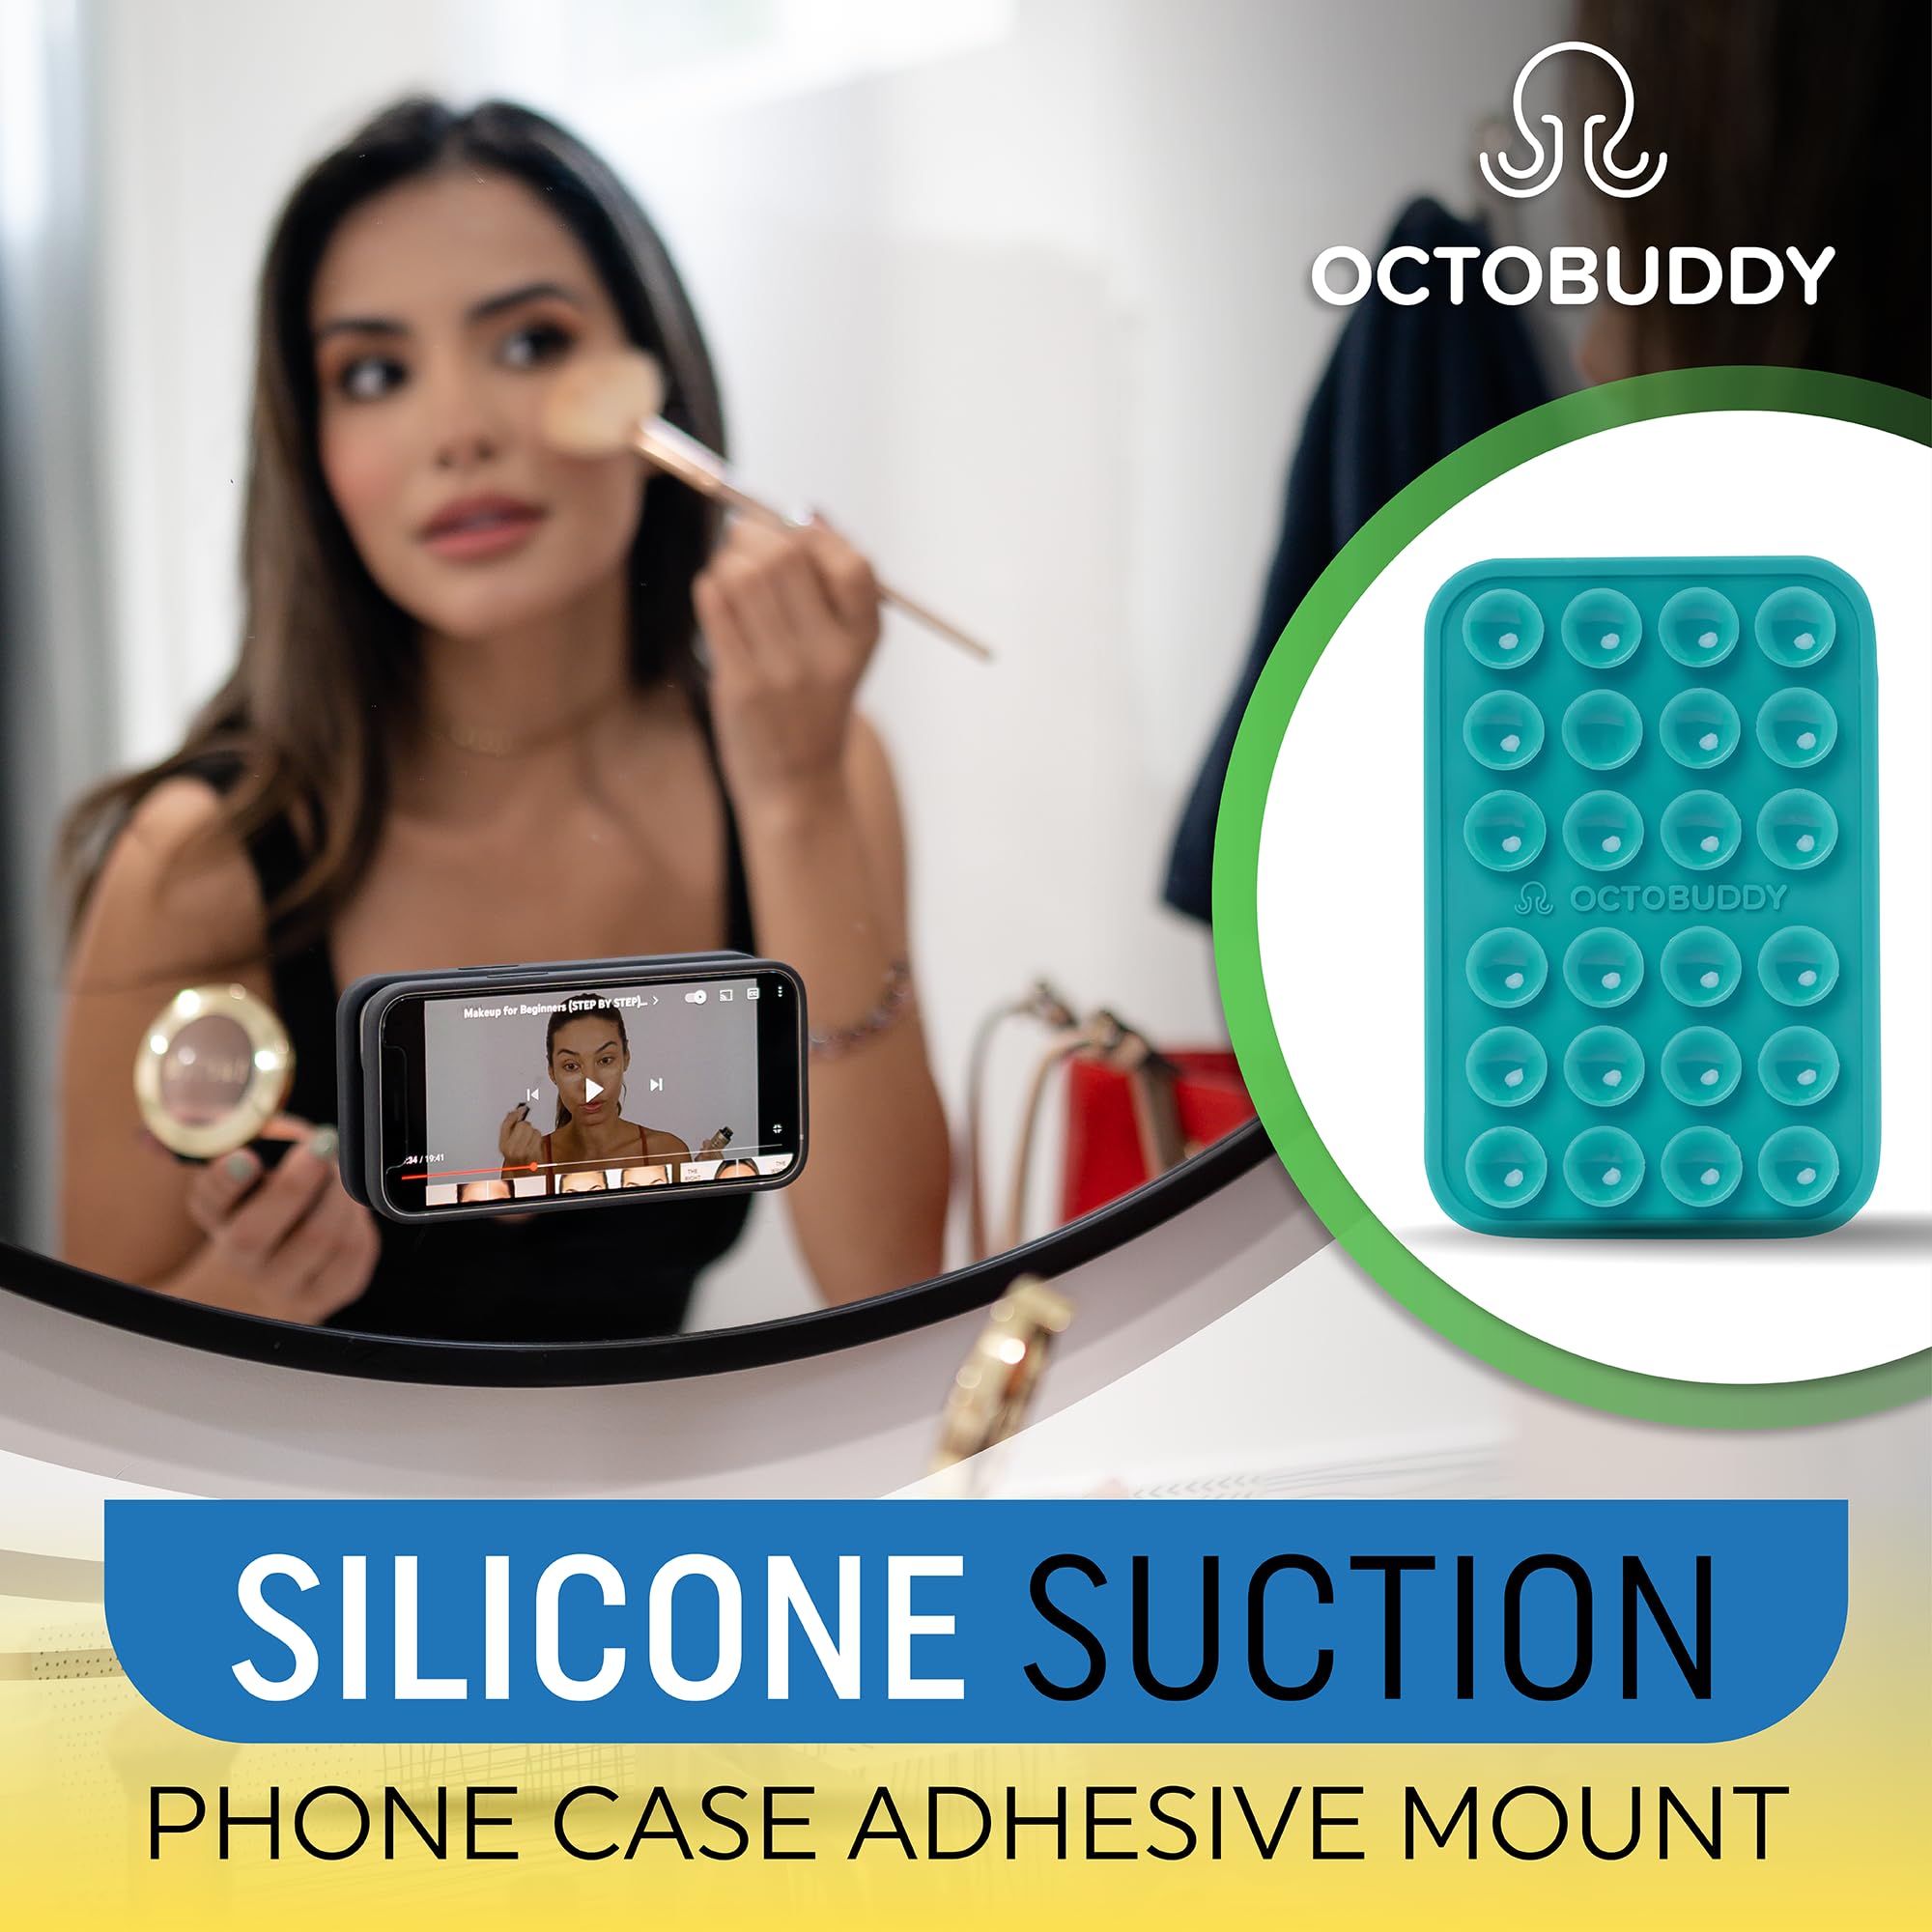 OCTOBUDDY MAX || Silicone Suction Phone Case Adhesive Mount || Compatible with iPhone and Android, Anti-Slip Hands-Free Mobile Accessory Holder for Selfies and Videos (MAX - Darth Vader)